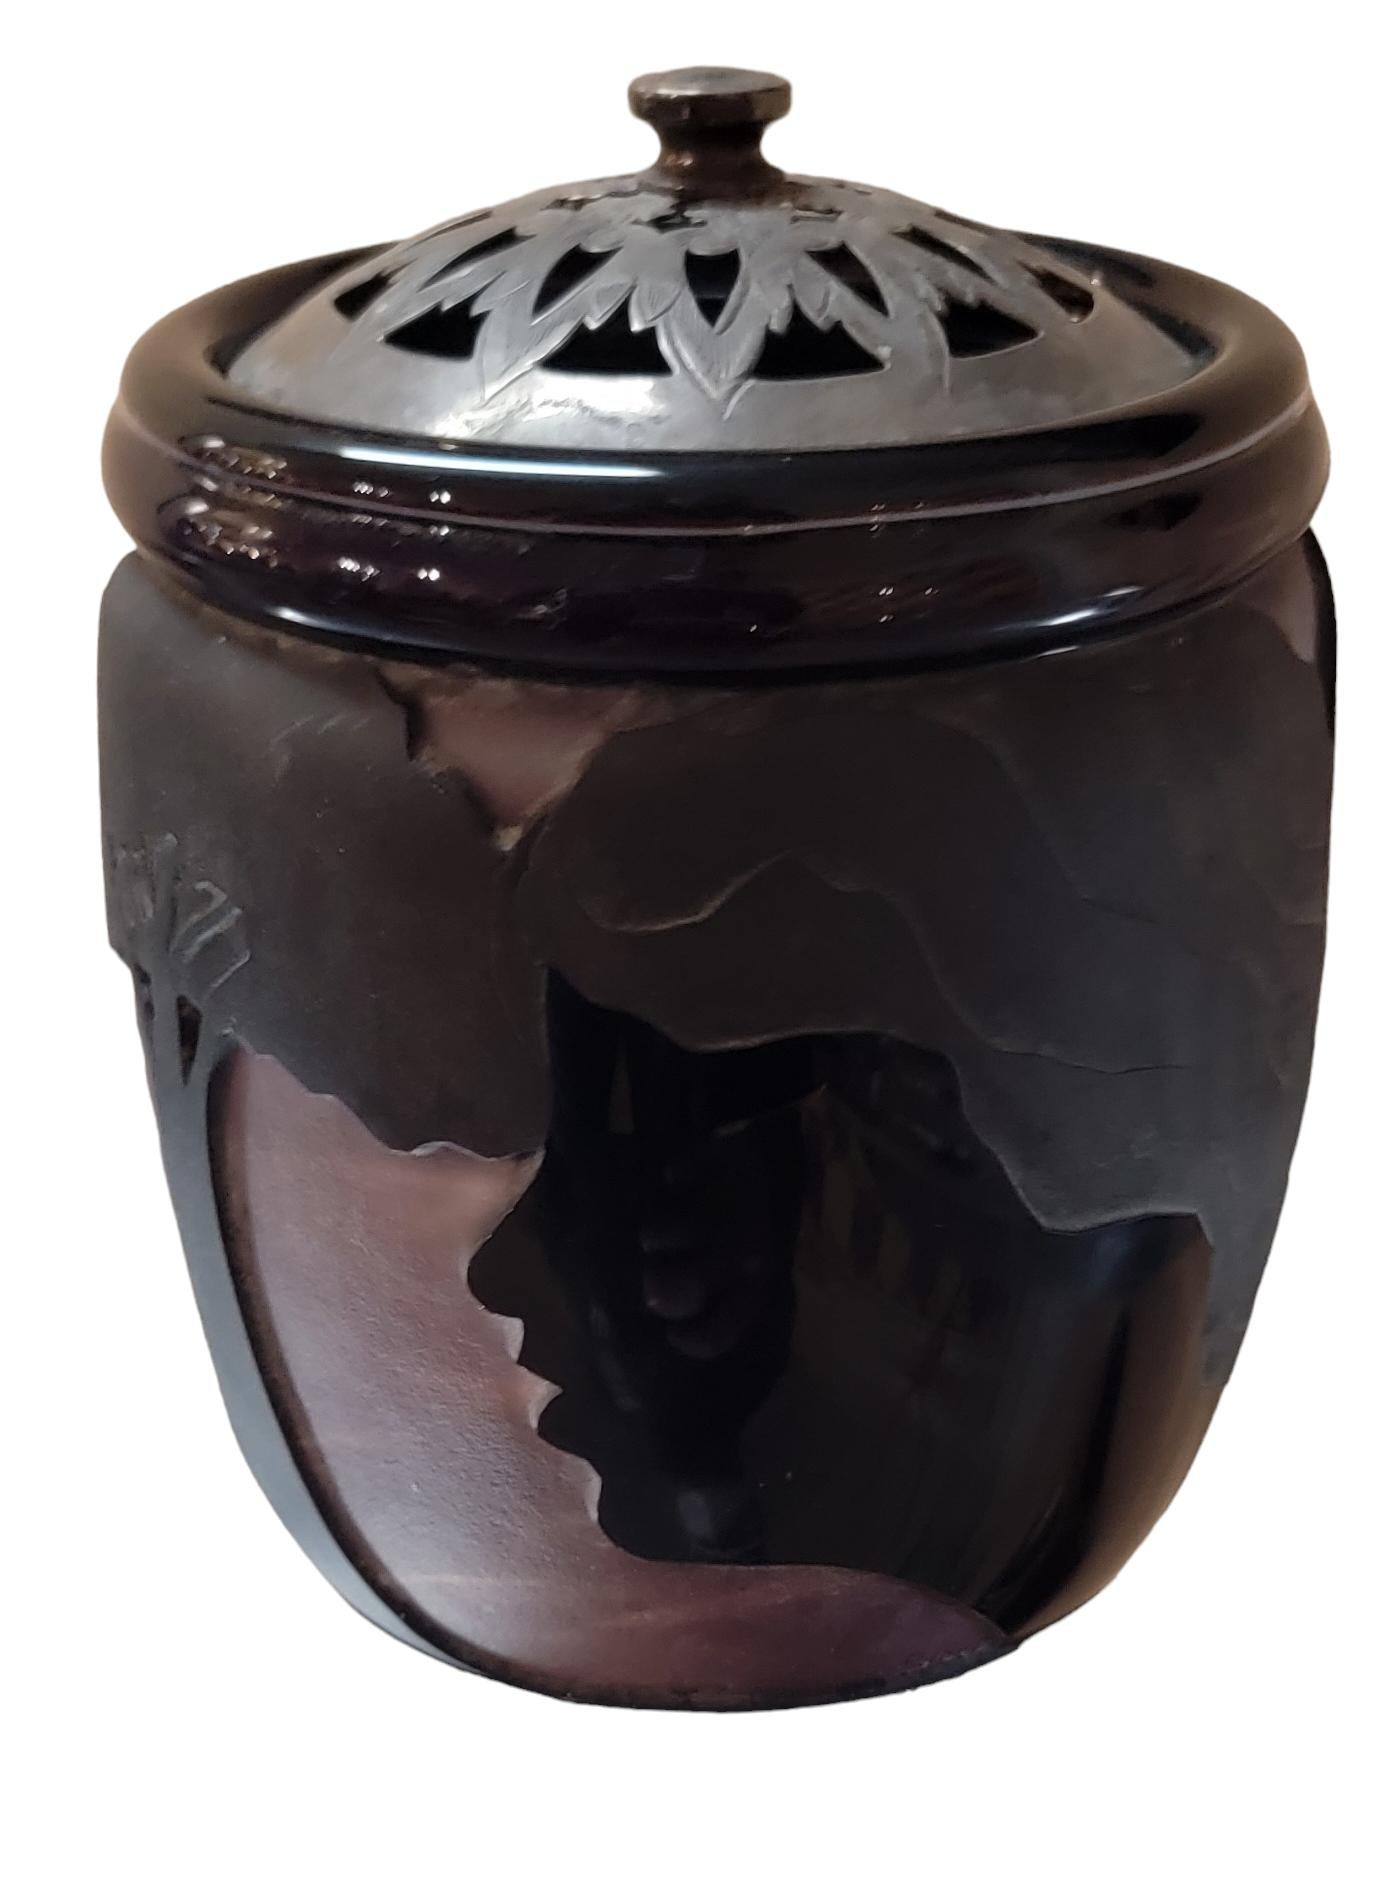 Decorative Vase By Dan Shura with silver lid. The silvered lid has very small cu outs for circulation of air trough the jar. The jars cylindrical design has images of a tree and on the sides of the tree being separated is a man and a woman. Giving